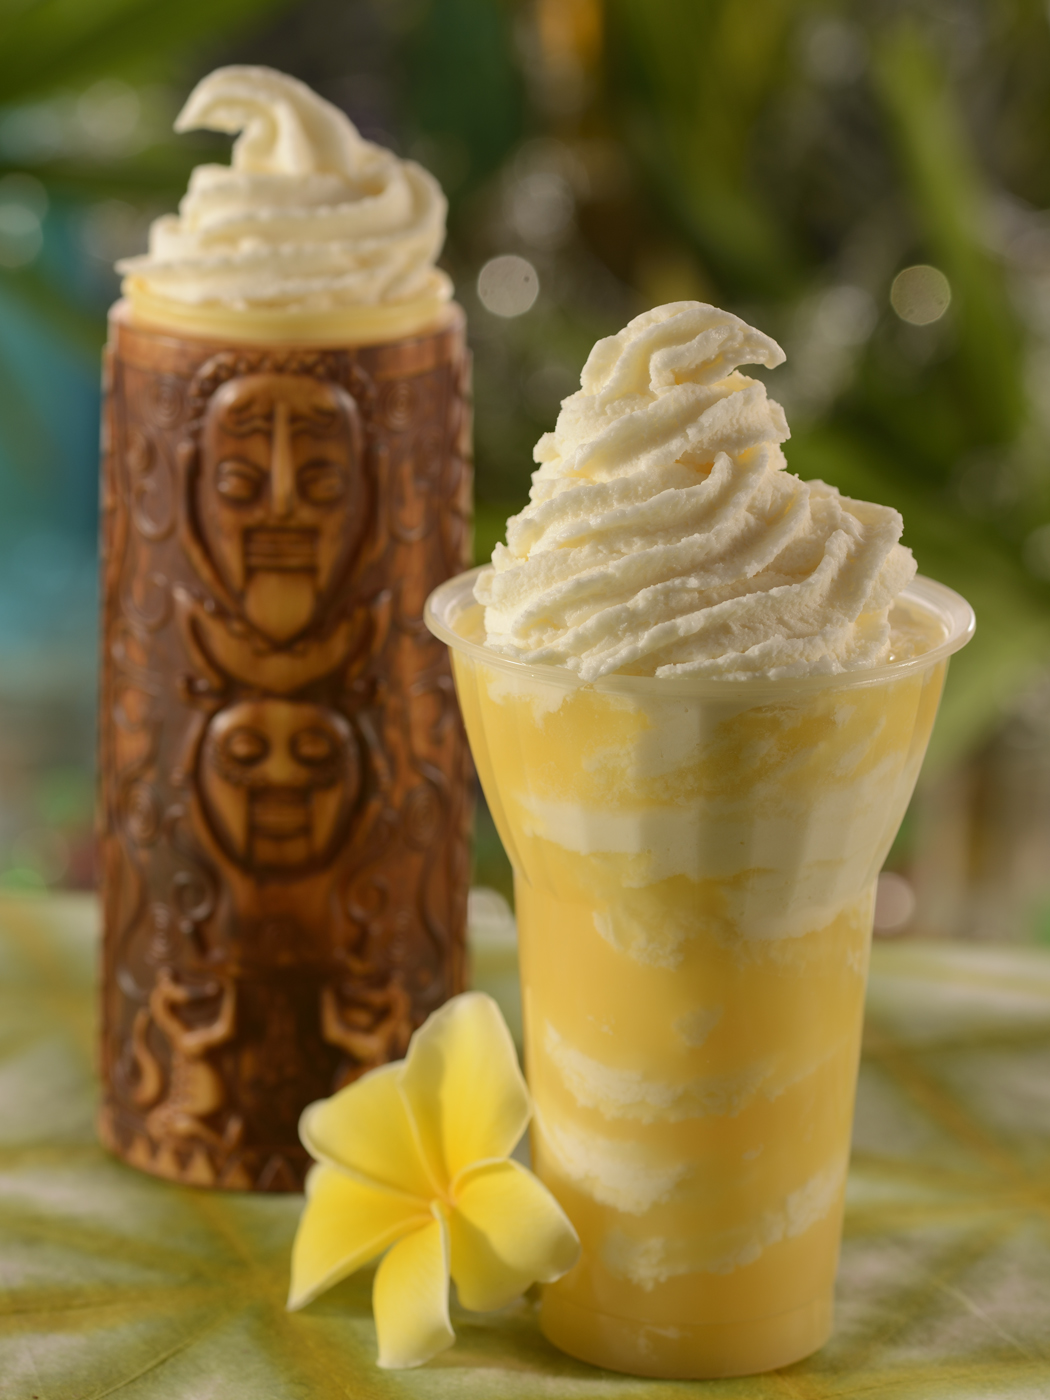 Walt Disney World While Pregnant featured by top US Disney blogger, Marcie and the Mouse | The perfect tropical treat for Disney's Polynesian Village Resort guests, the delicious Dole Whip soft serve and Dole Whip floats can be found at Pineapple Lanai outside the Great Ceremonial House. This walk-up window is the only dedicated spot for the Dole Whip outside of the Magic Kingdom. Disney's Polynesian Village Resort is located at Walt Disney World Resort in Lake Buena Vista, Fla. (Disney)